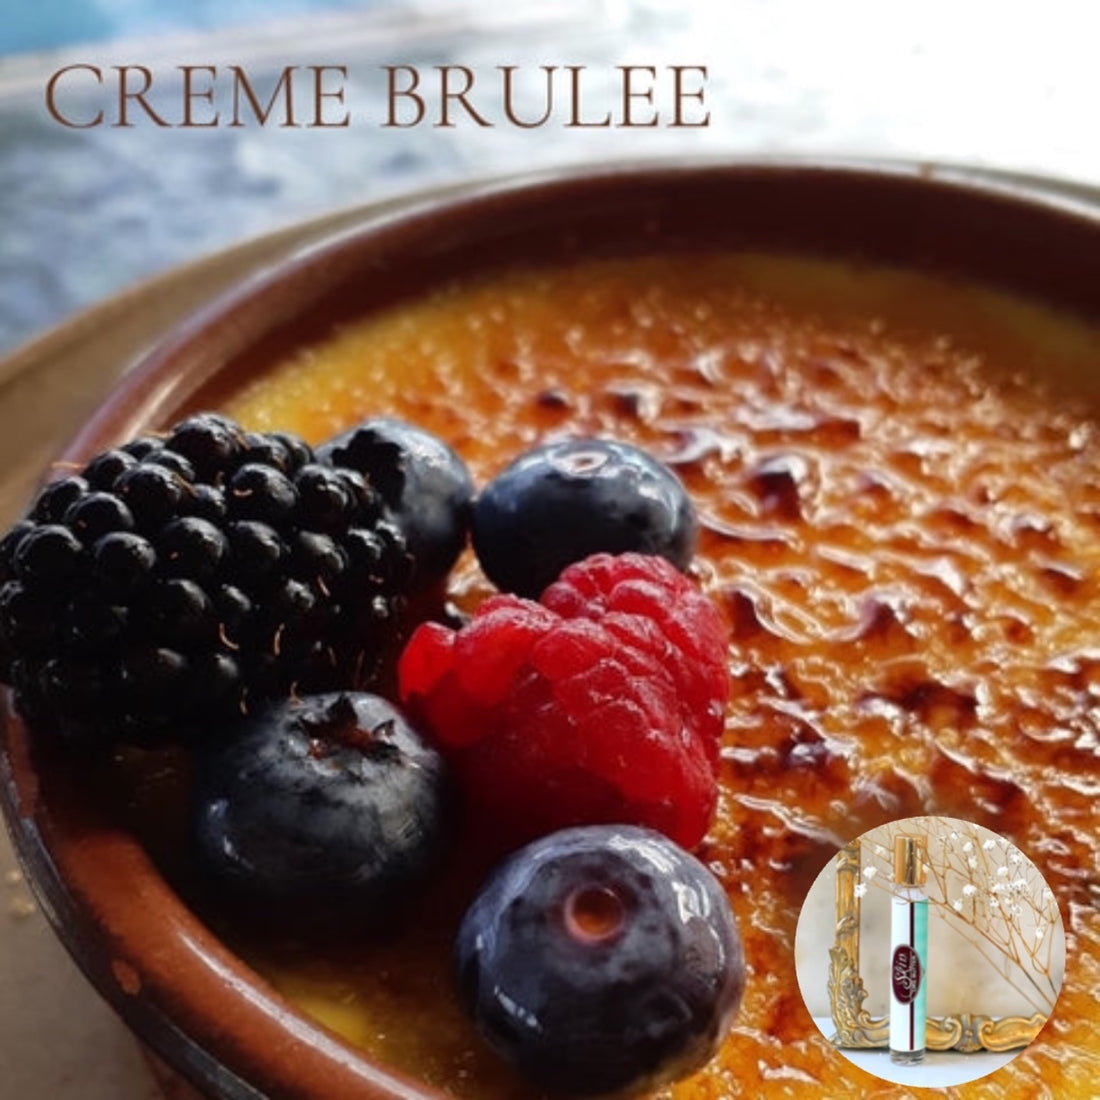 CREME BRULEE Roll On Travel Perfume in a Roll on or Spray bottle  - Buy 1 get 1 50% off-use coupon code 2PLEASE